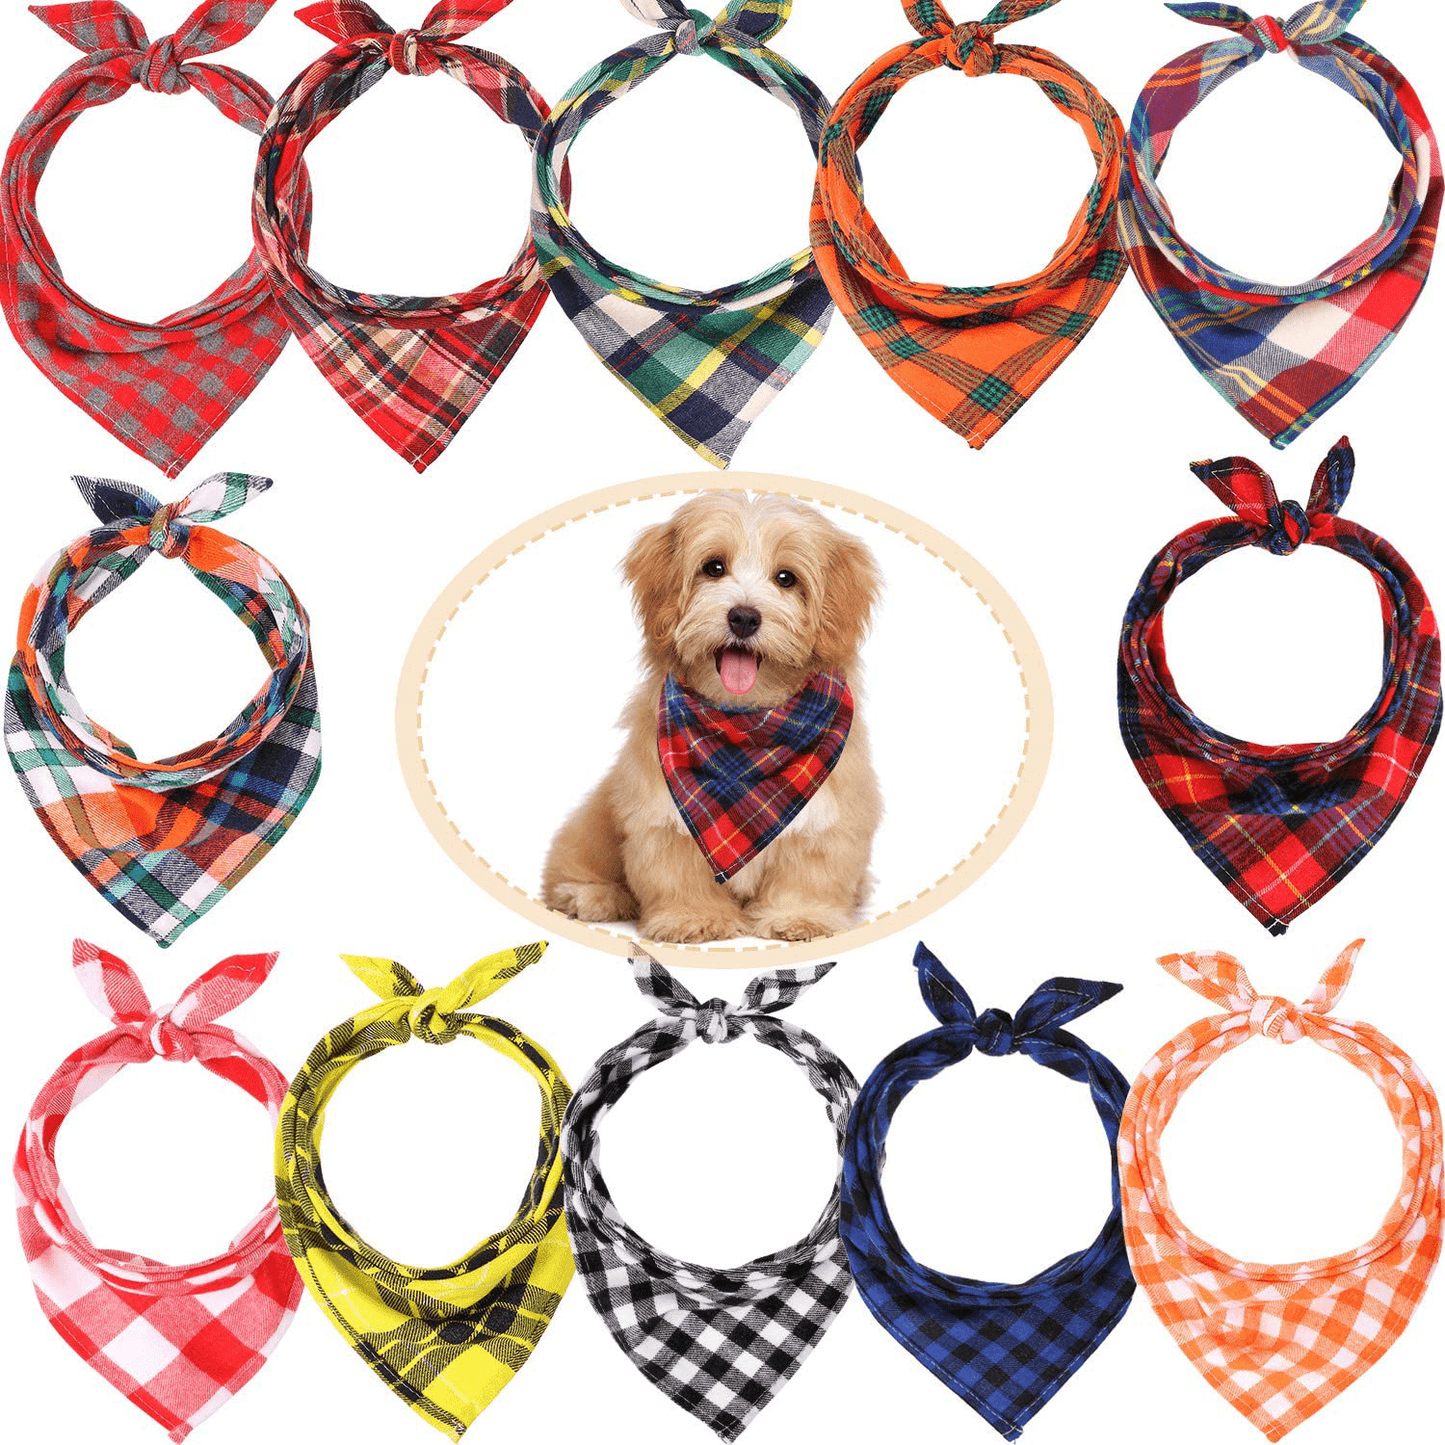 12 Pieces Dog Bandanas - Triangle Dog Scarf, Washable Reversible Printing, Bibs Dog Kerchief Set, Suitable for Small or Medium-Sized Cat and Dog Pets